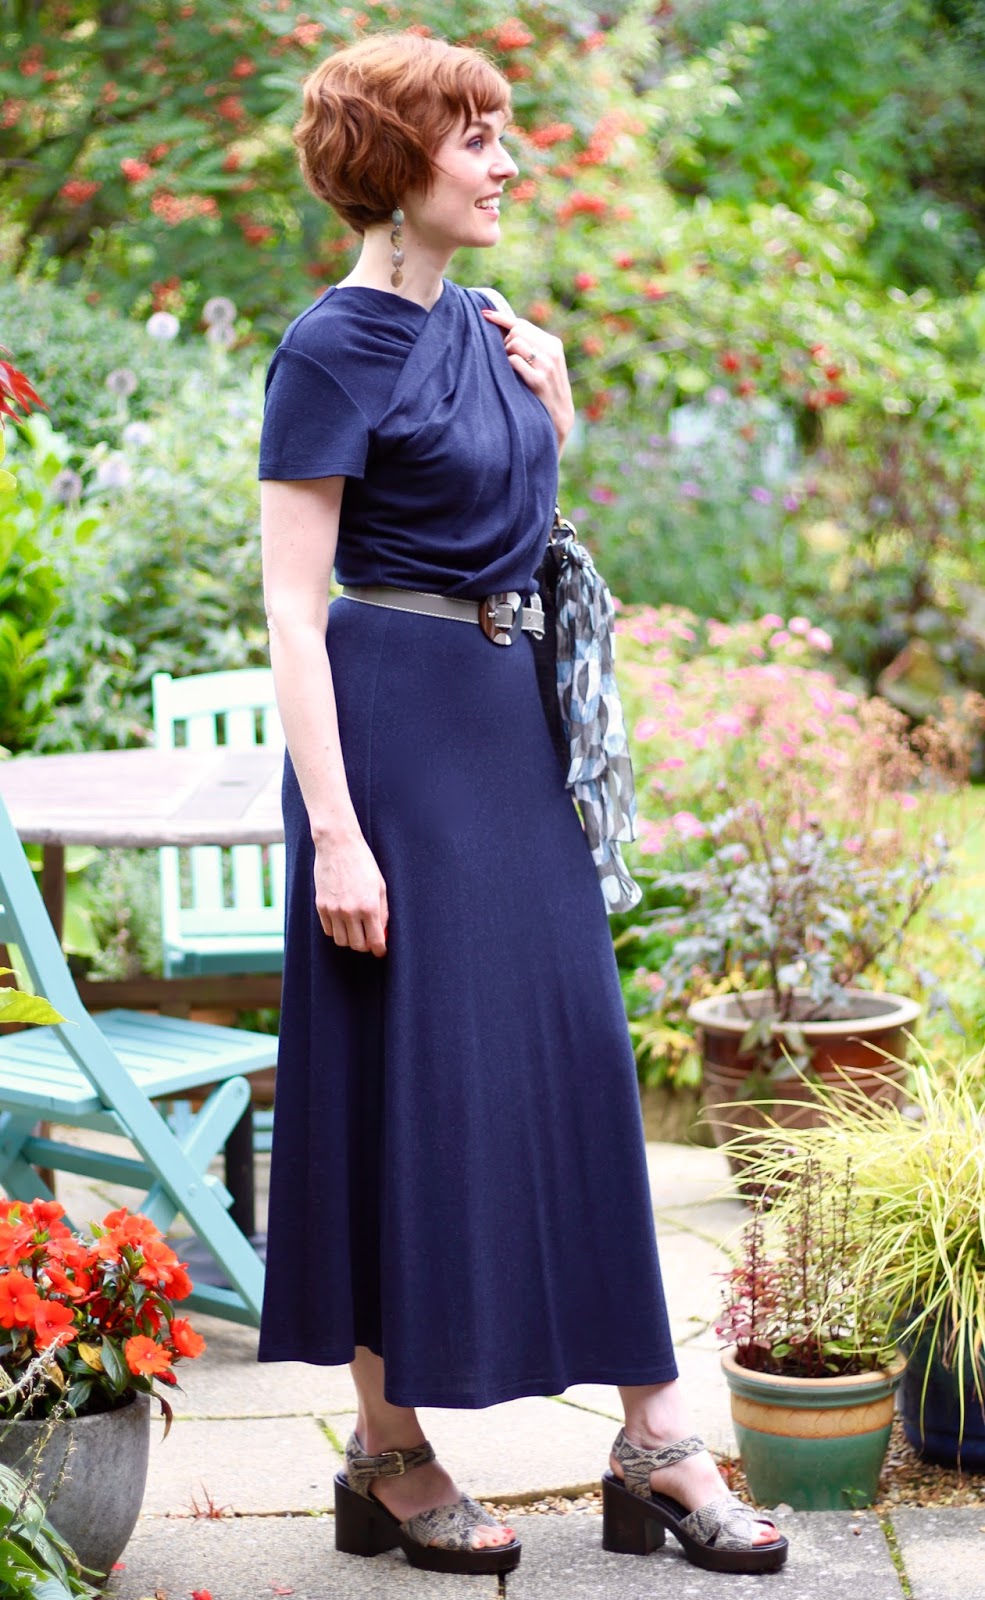 Fake Fabulous | Navy Finery Midi-dress, grey and taupe accessories & Chunky Vagabond sandals.